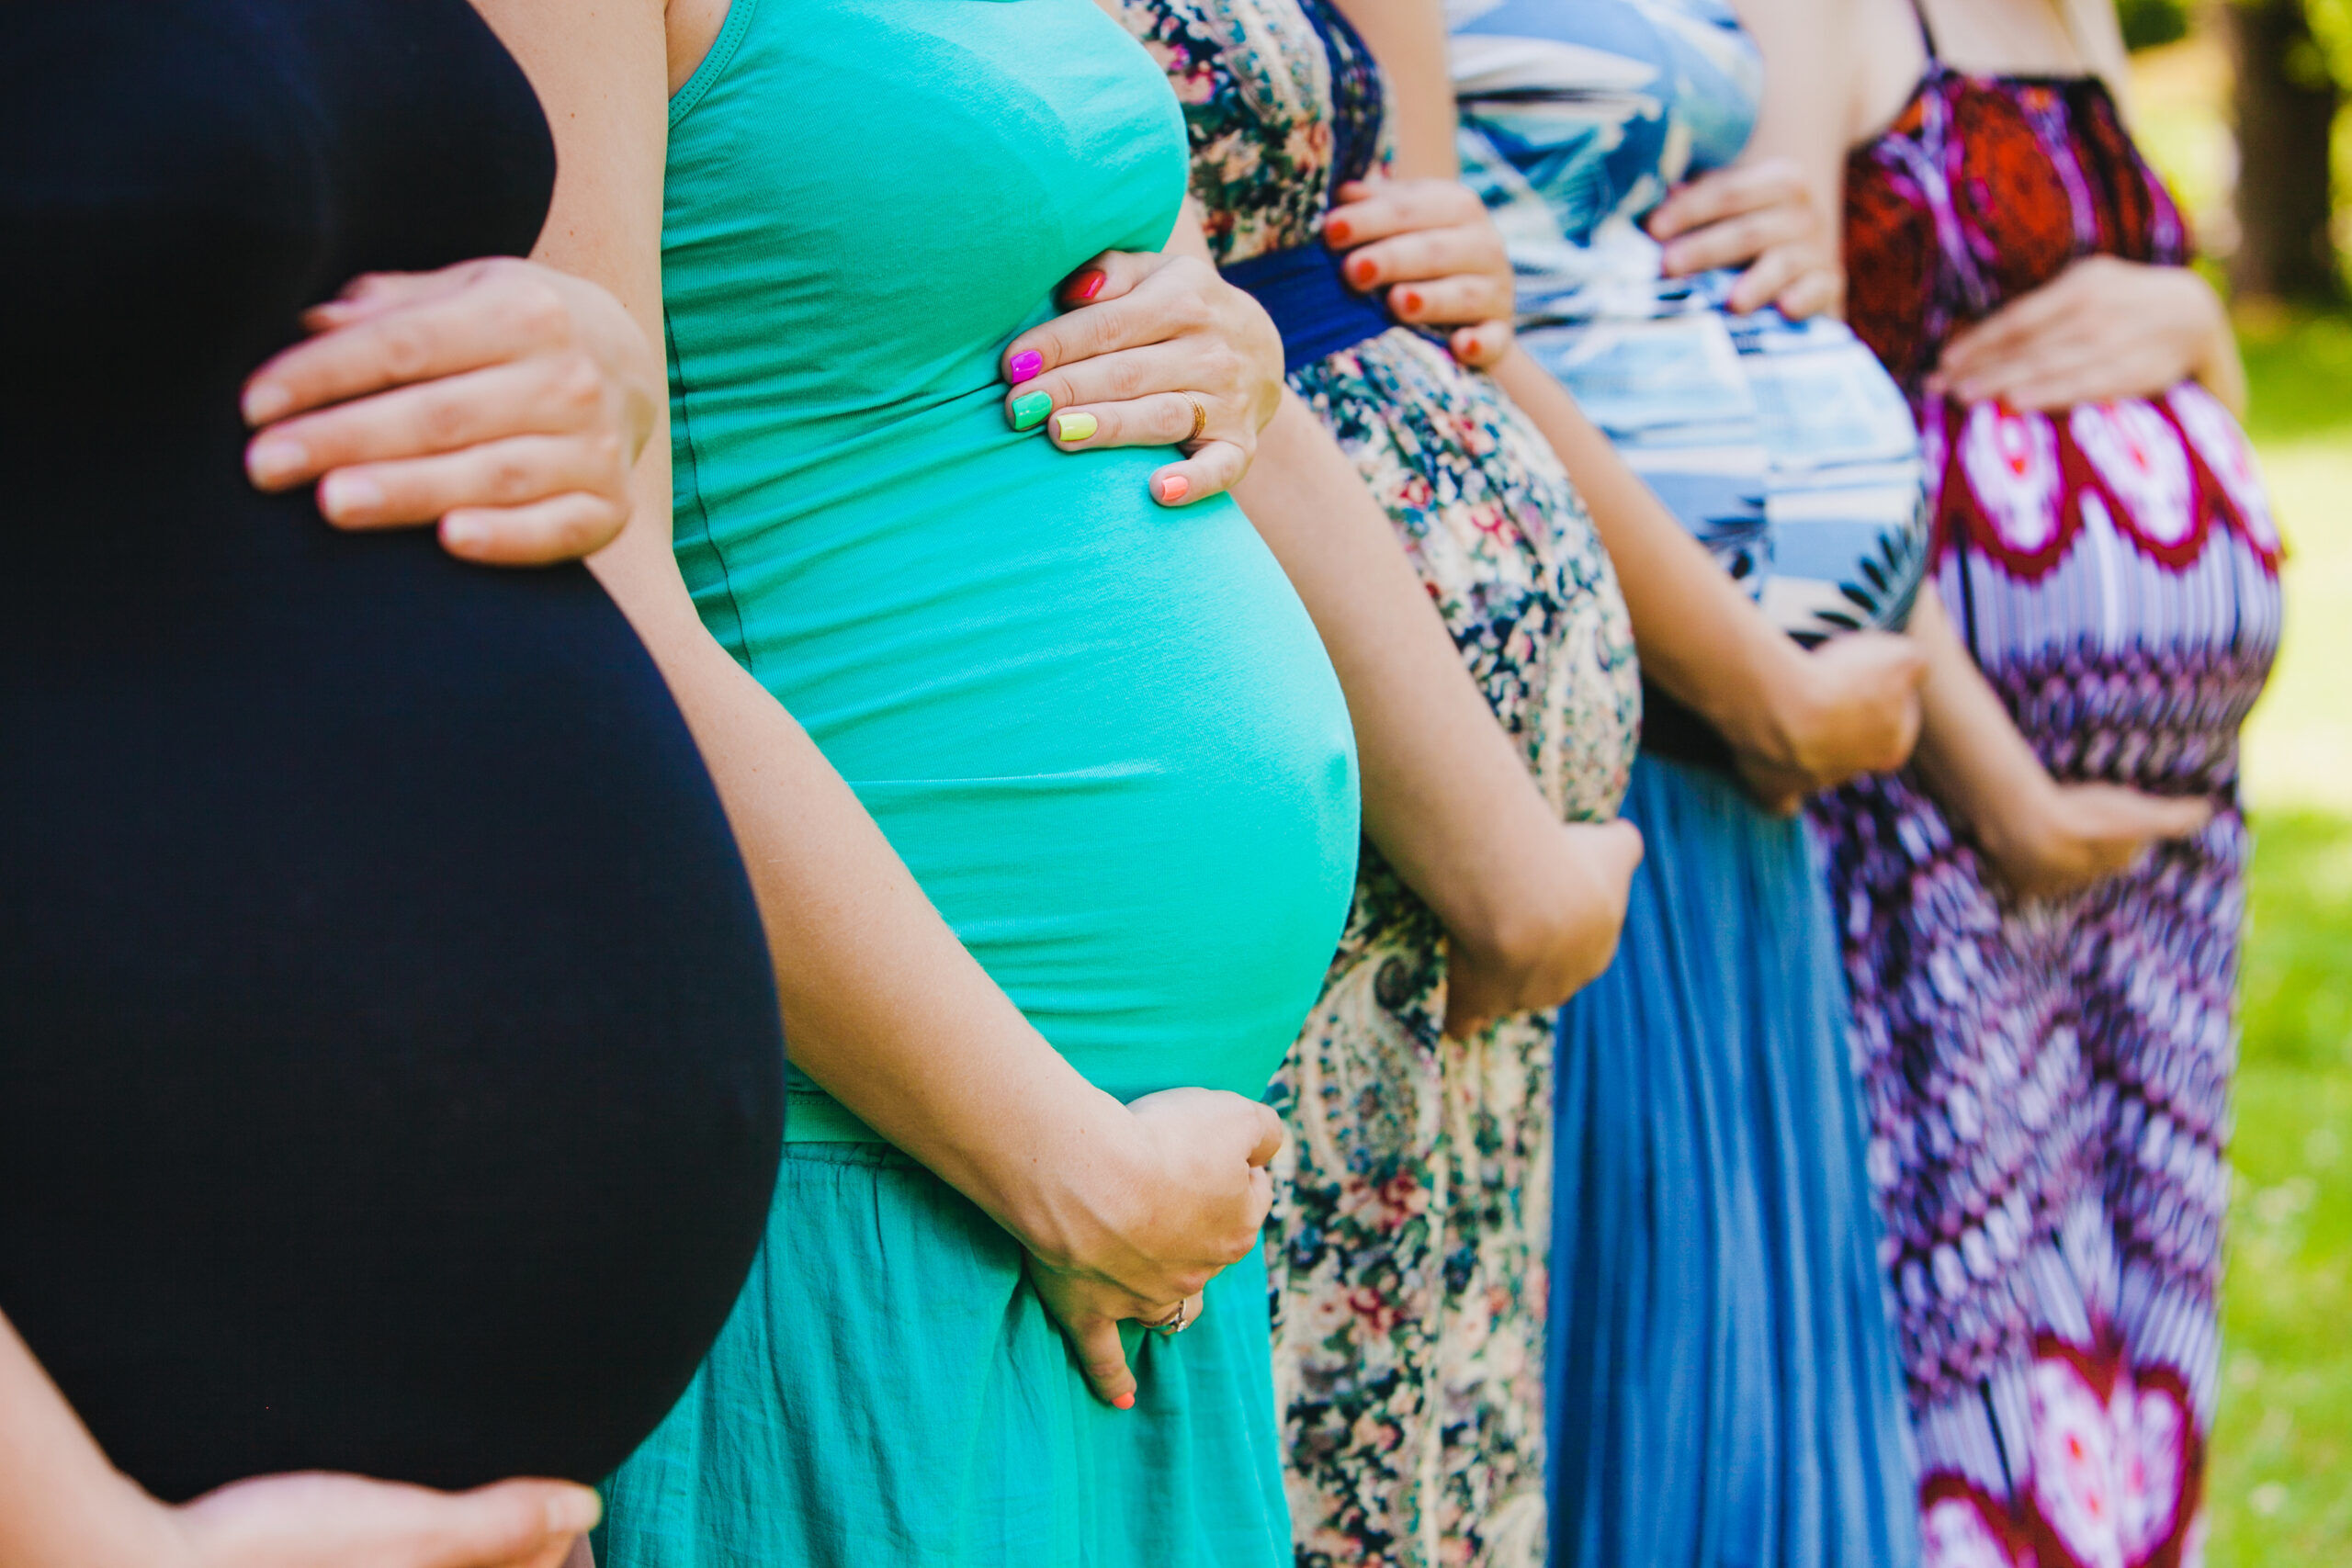 Closeup of group pregnant bellies. Five pregnant bellies.